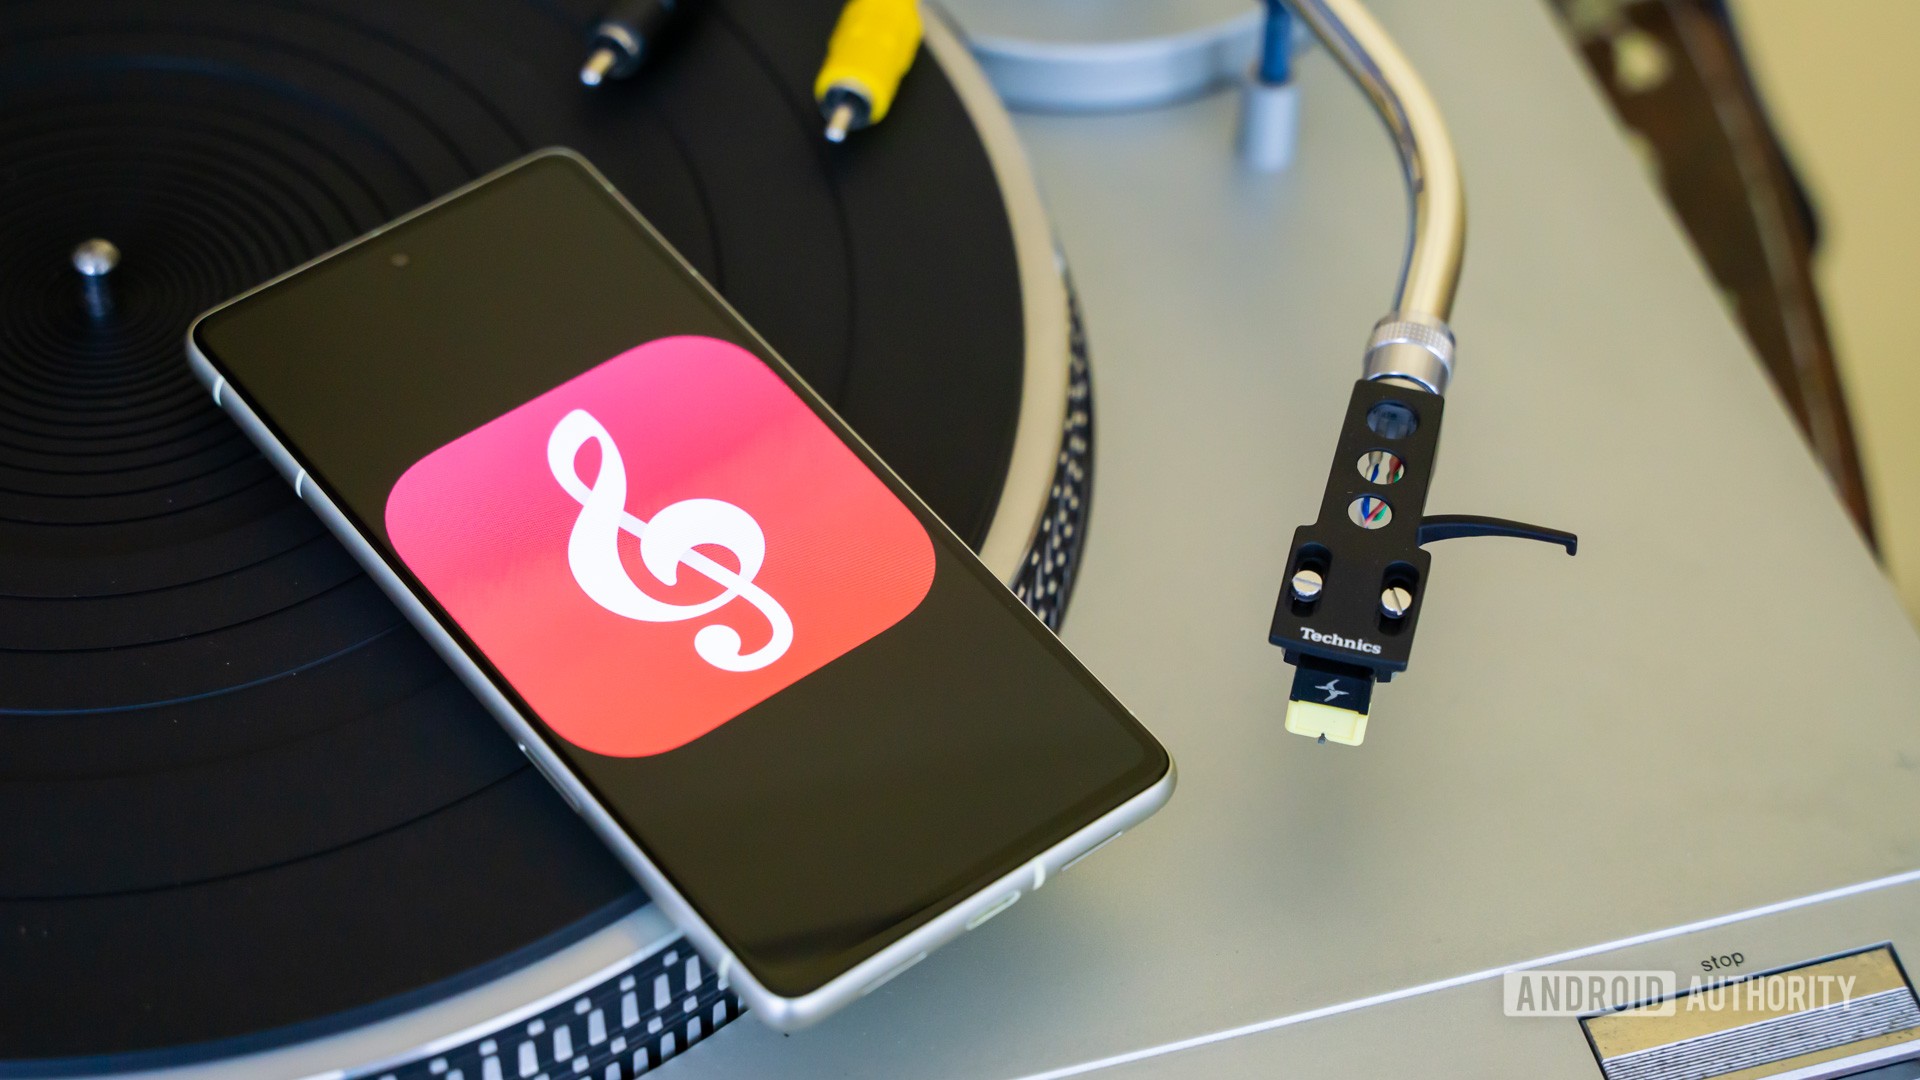 Turning up the volume: What does Apple Music need to surpass Spotify?